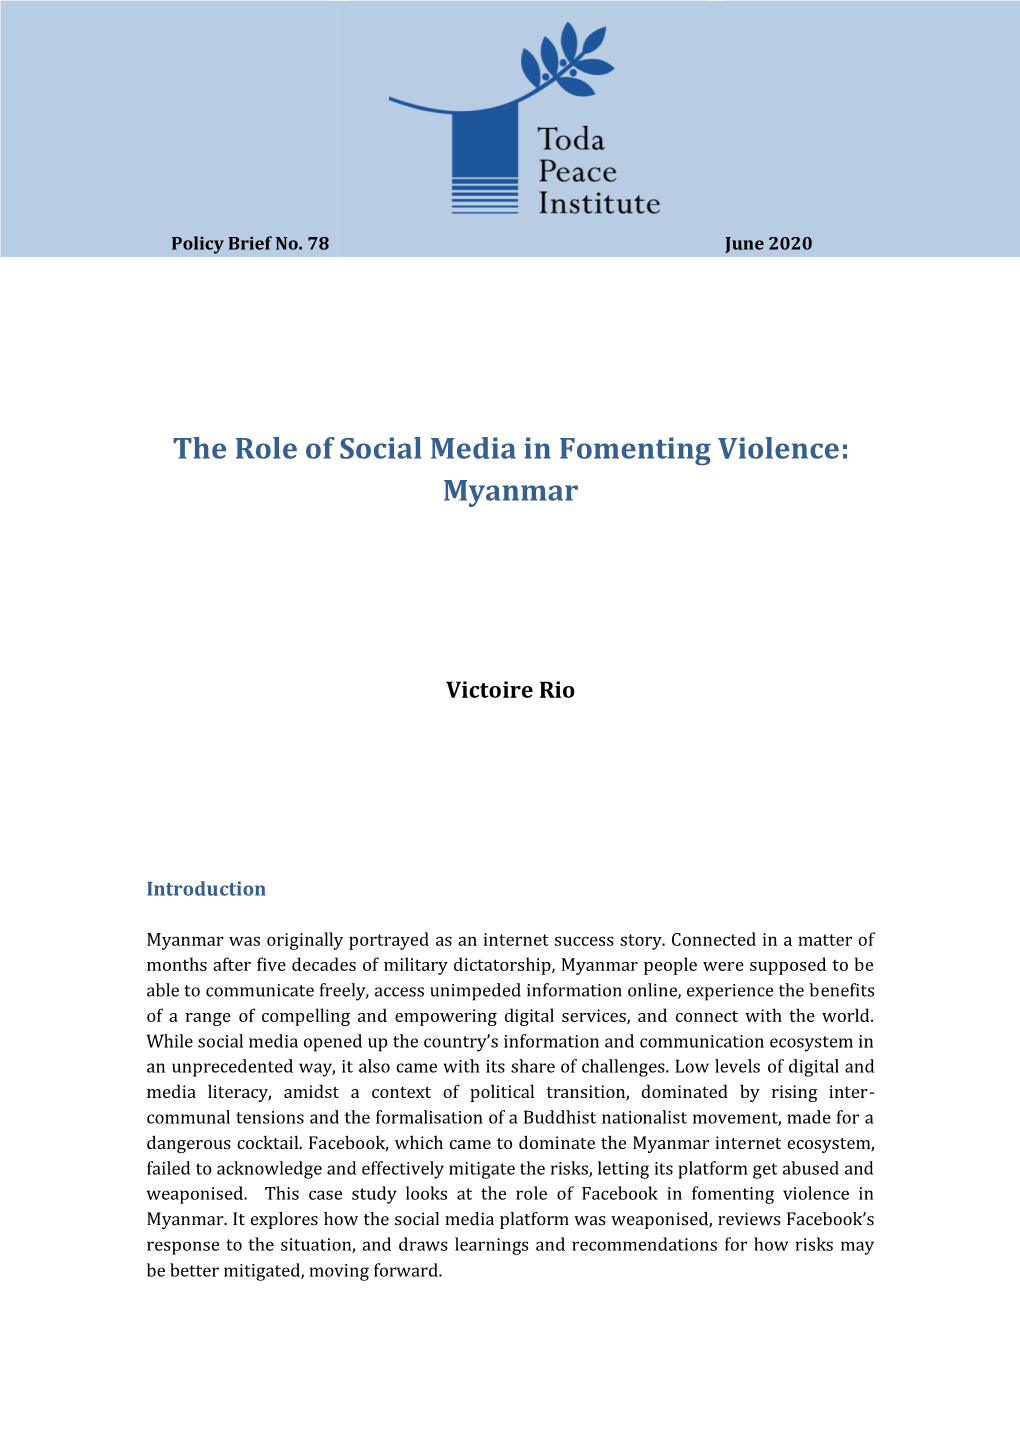 The Role of Social Media in Fomenting Violence: Myanmar